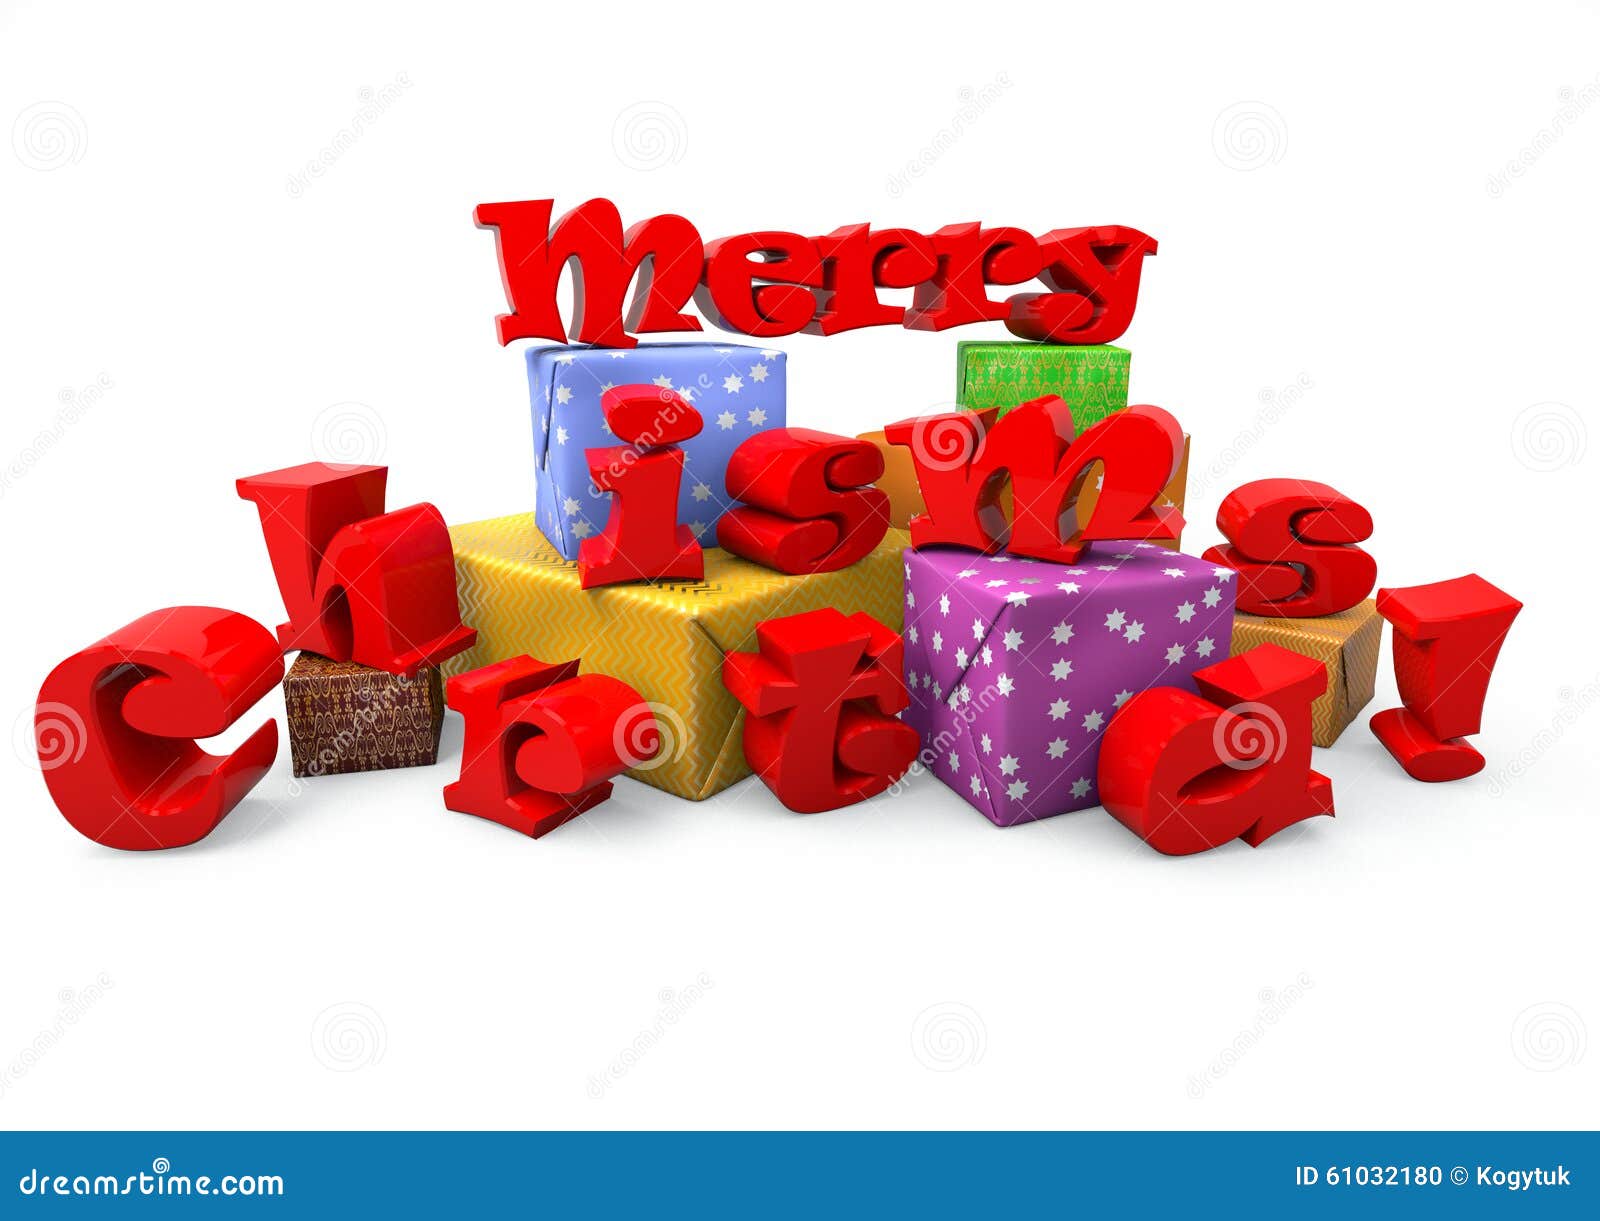 Merry Christmas 3d Text On White Background Stock 